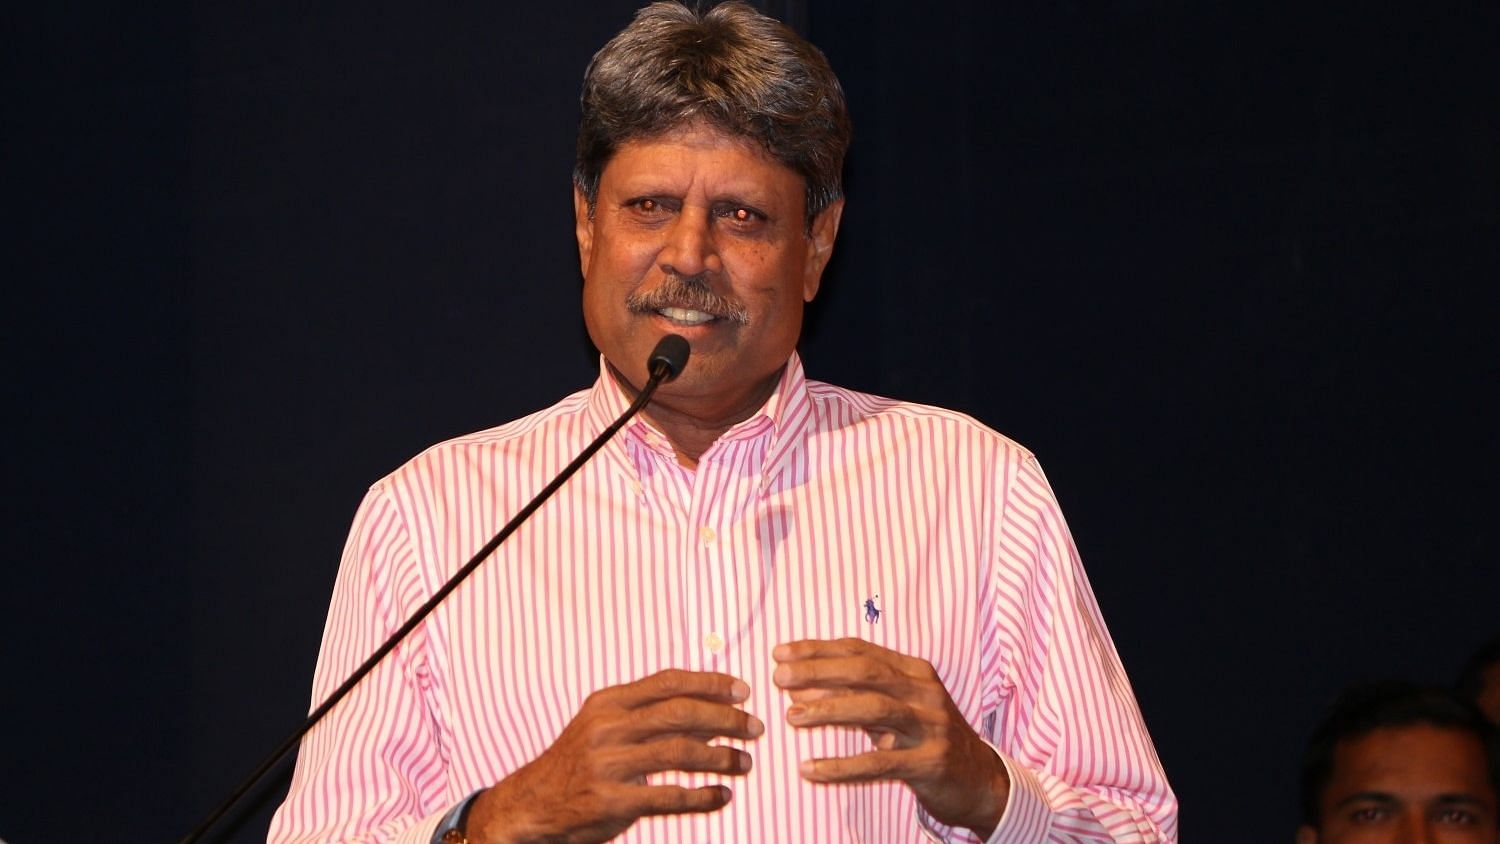 Kapil Dev rejected Shoaib Akhtar’s suggestion of an ODI series between India and Pakistan to raise funds to fight coronavirus.